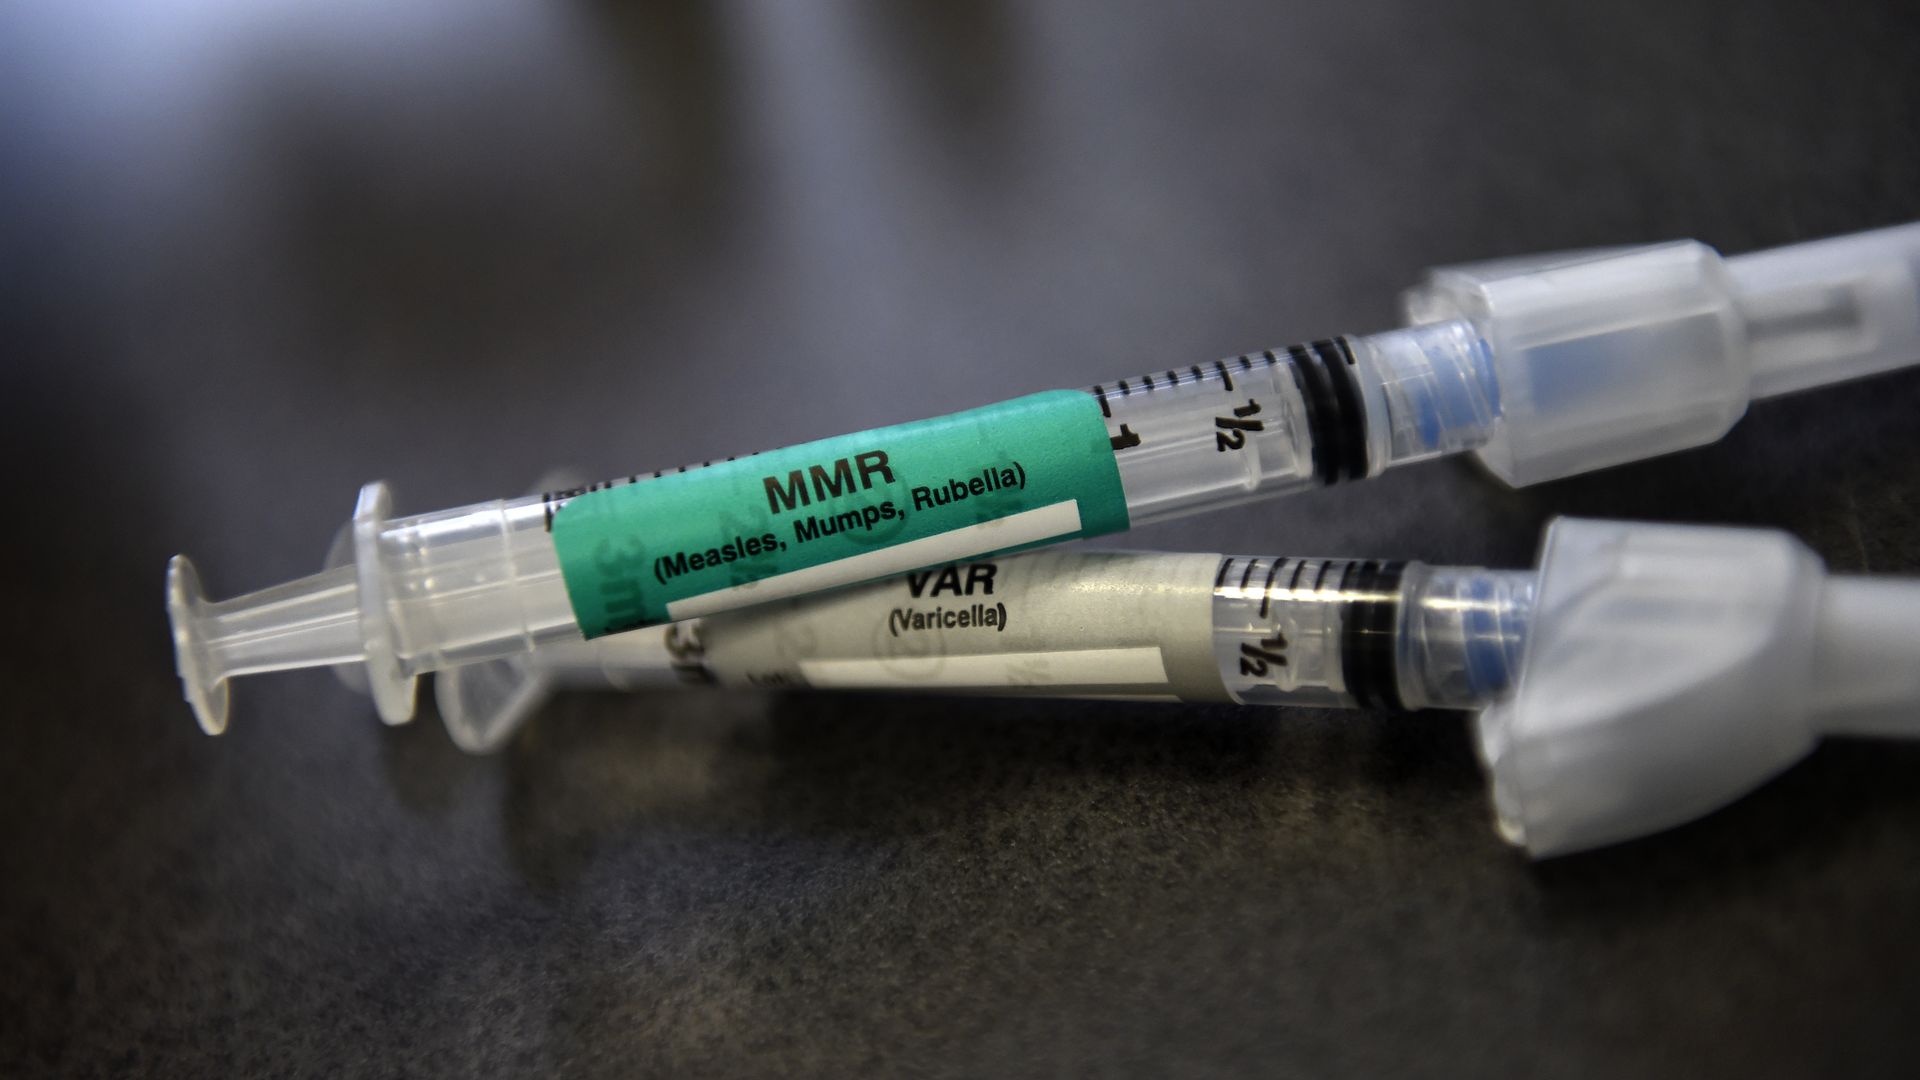 In this image, two syringes for the MMR vaccine are laying on top of each other on a table.